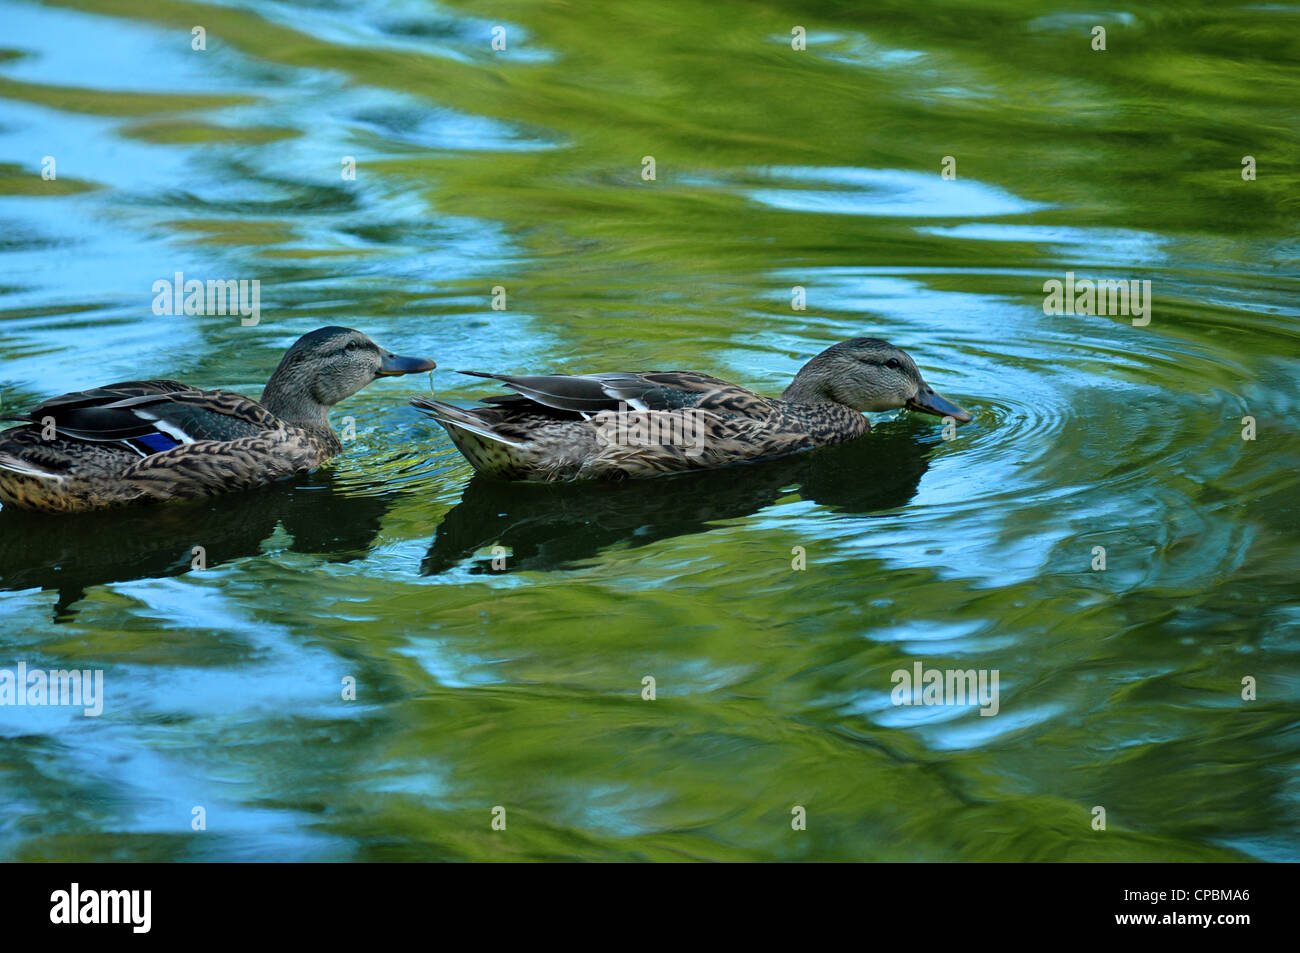 two female wood ducks swimming in green and blue reflecting pond water Stock Photo